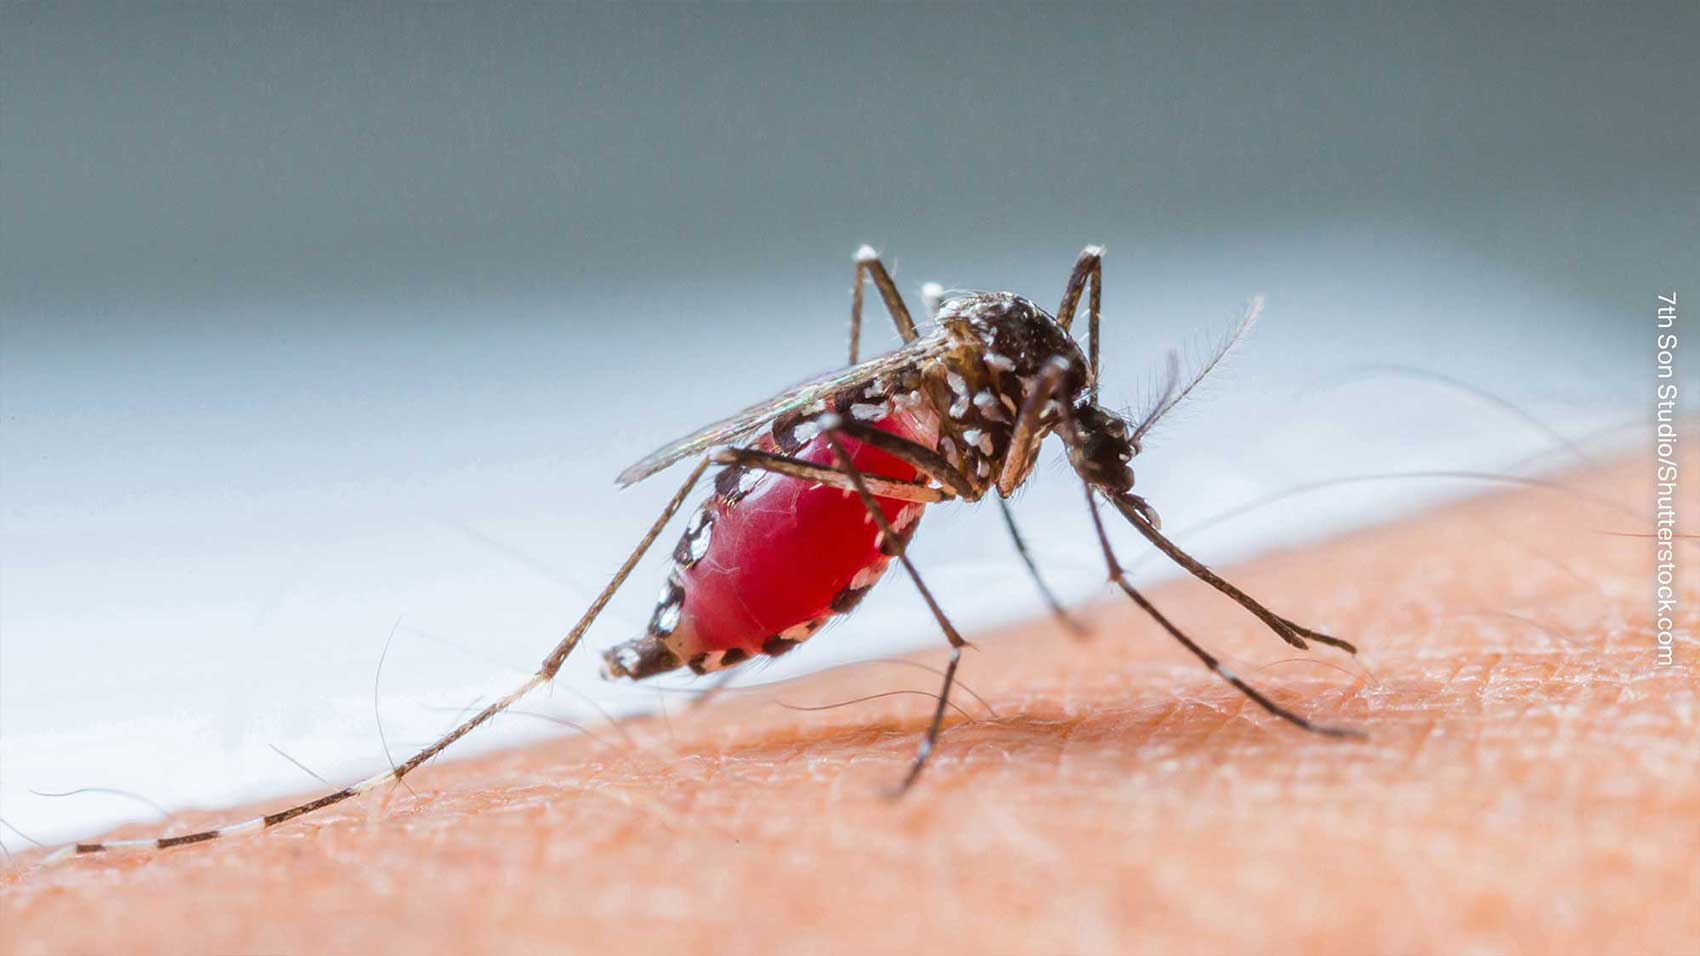 A mosquito that could transmit insect borne disease